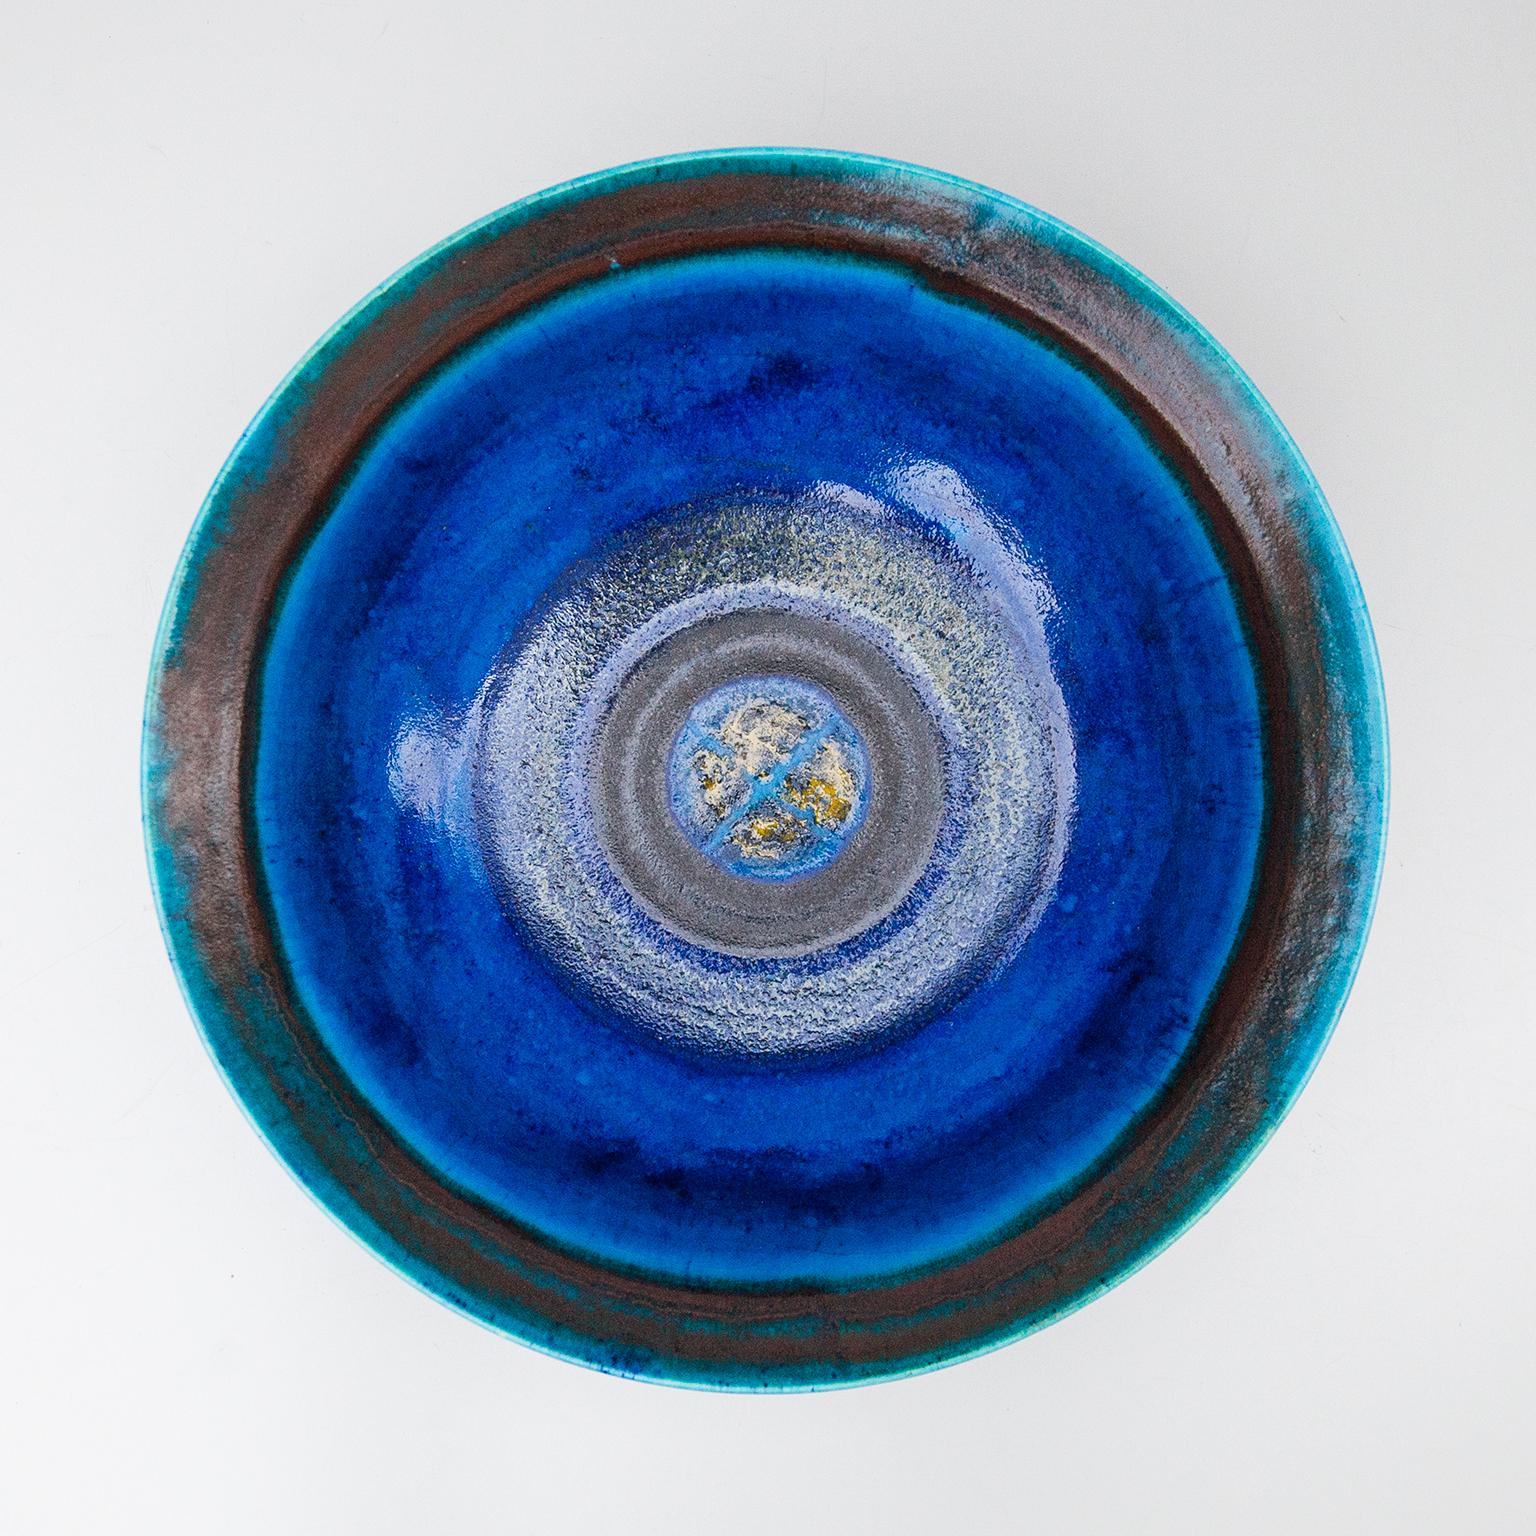 Colorful huge bowl in blue, dark grey and golden glazed ceramic made by Bruno Gambone in the 1970s, signed Gambone Italy on the bottom.